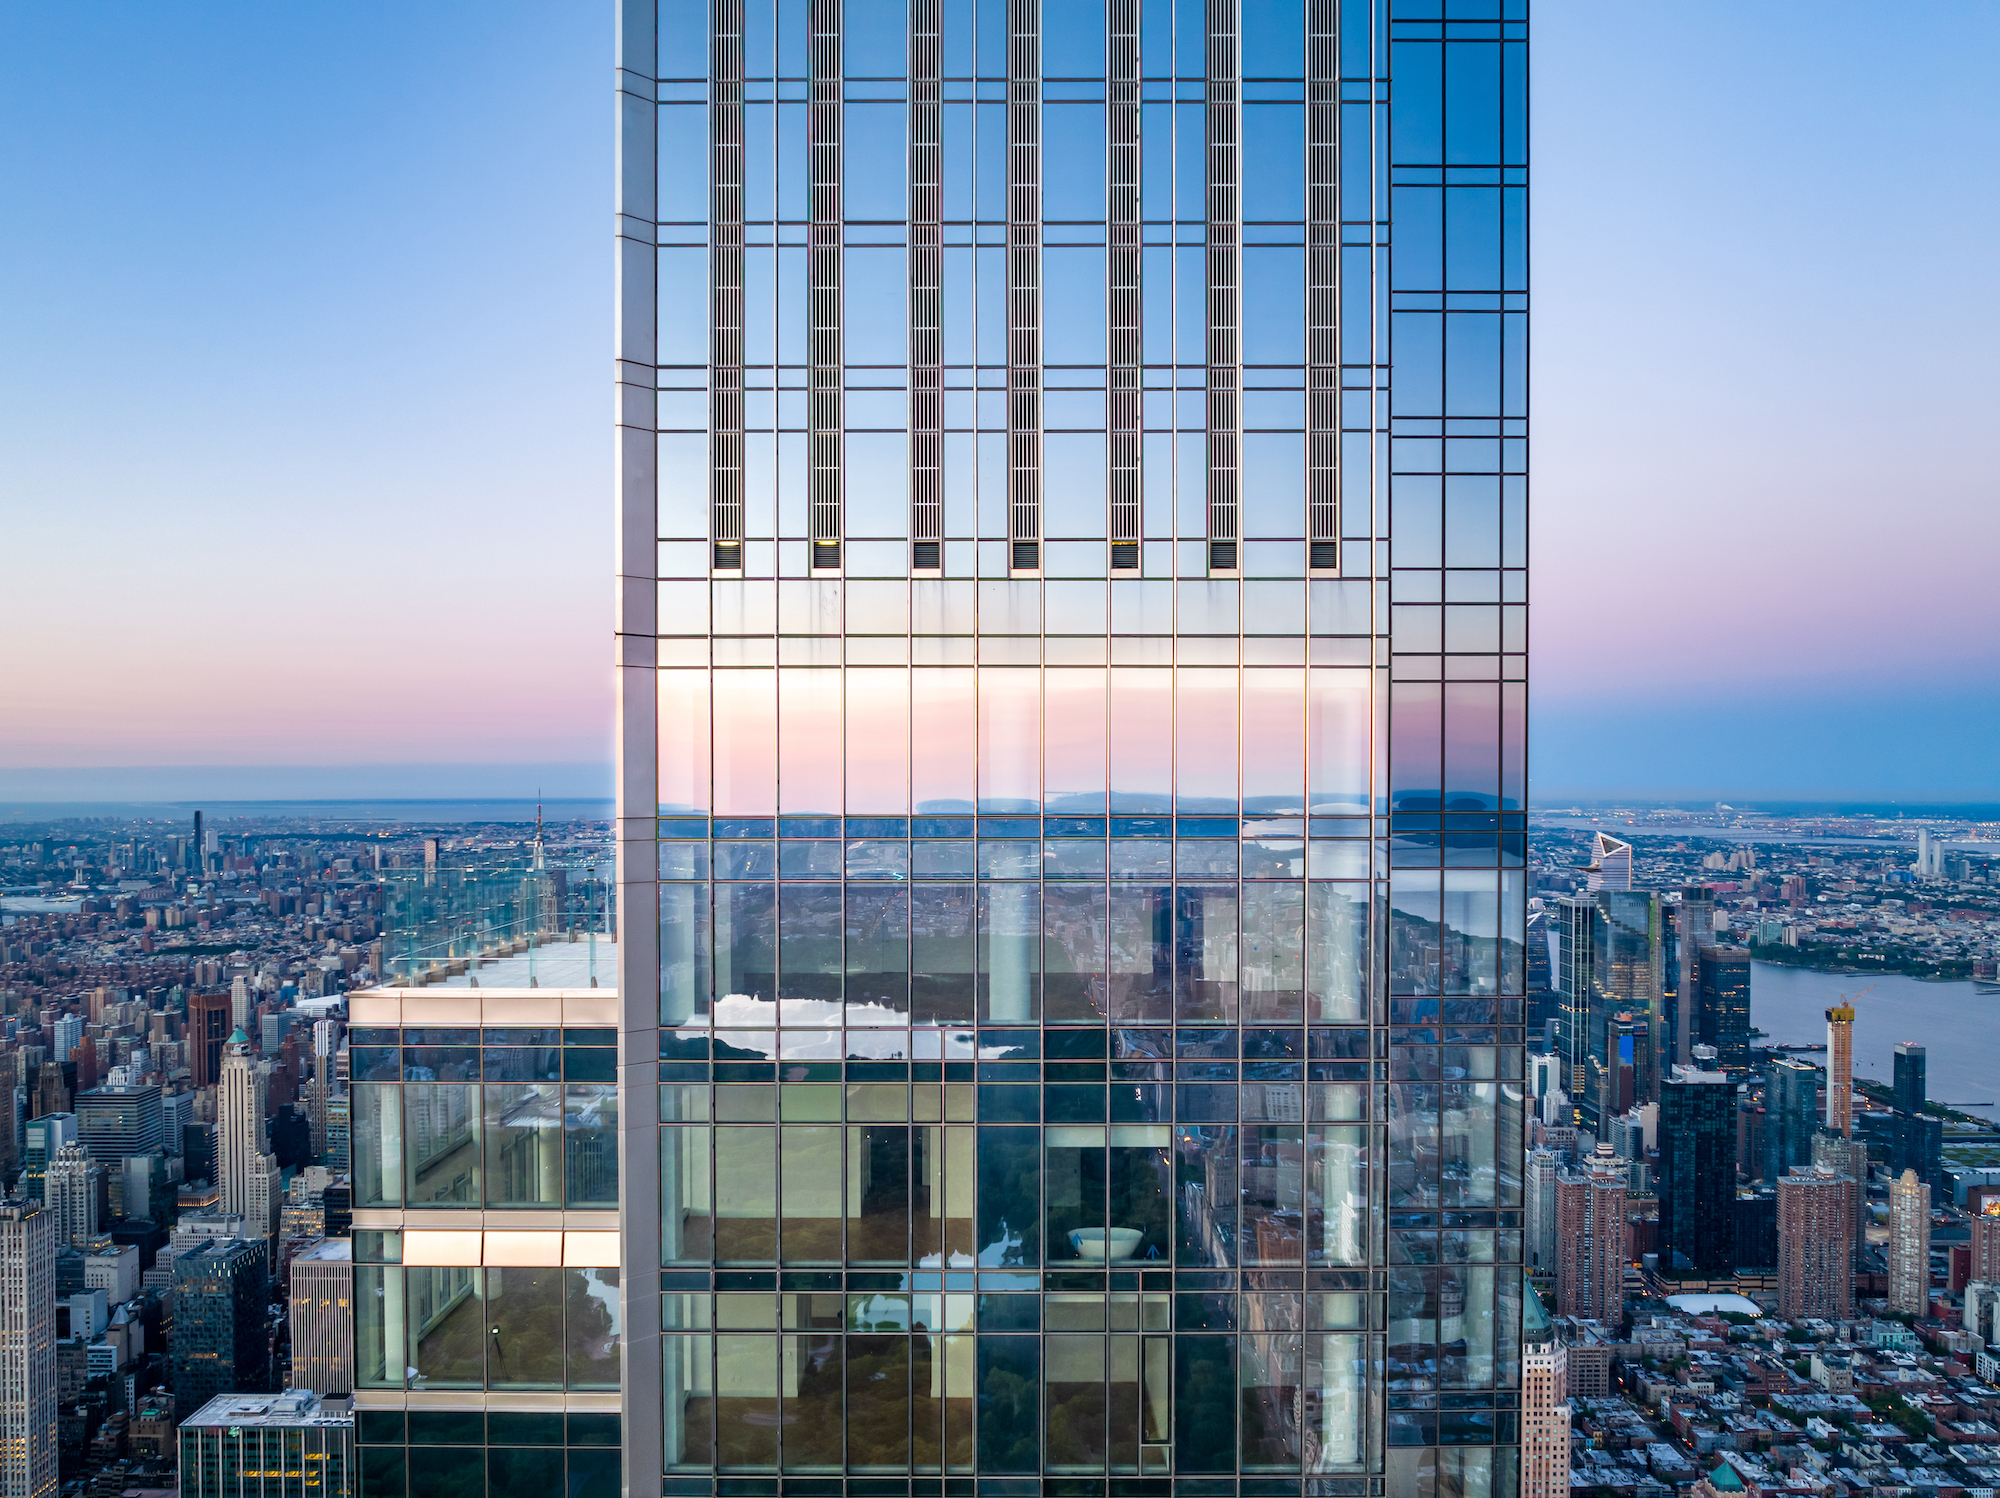 NYC penthouse to list for a record-breaking $250M